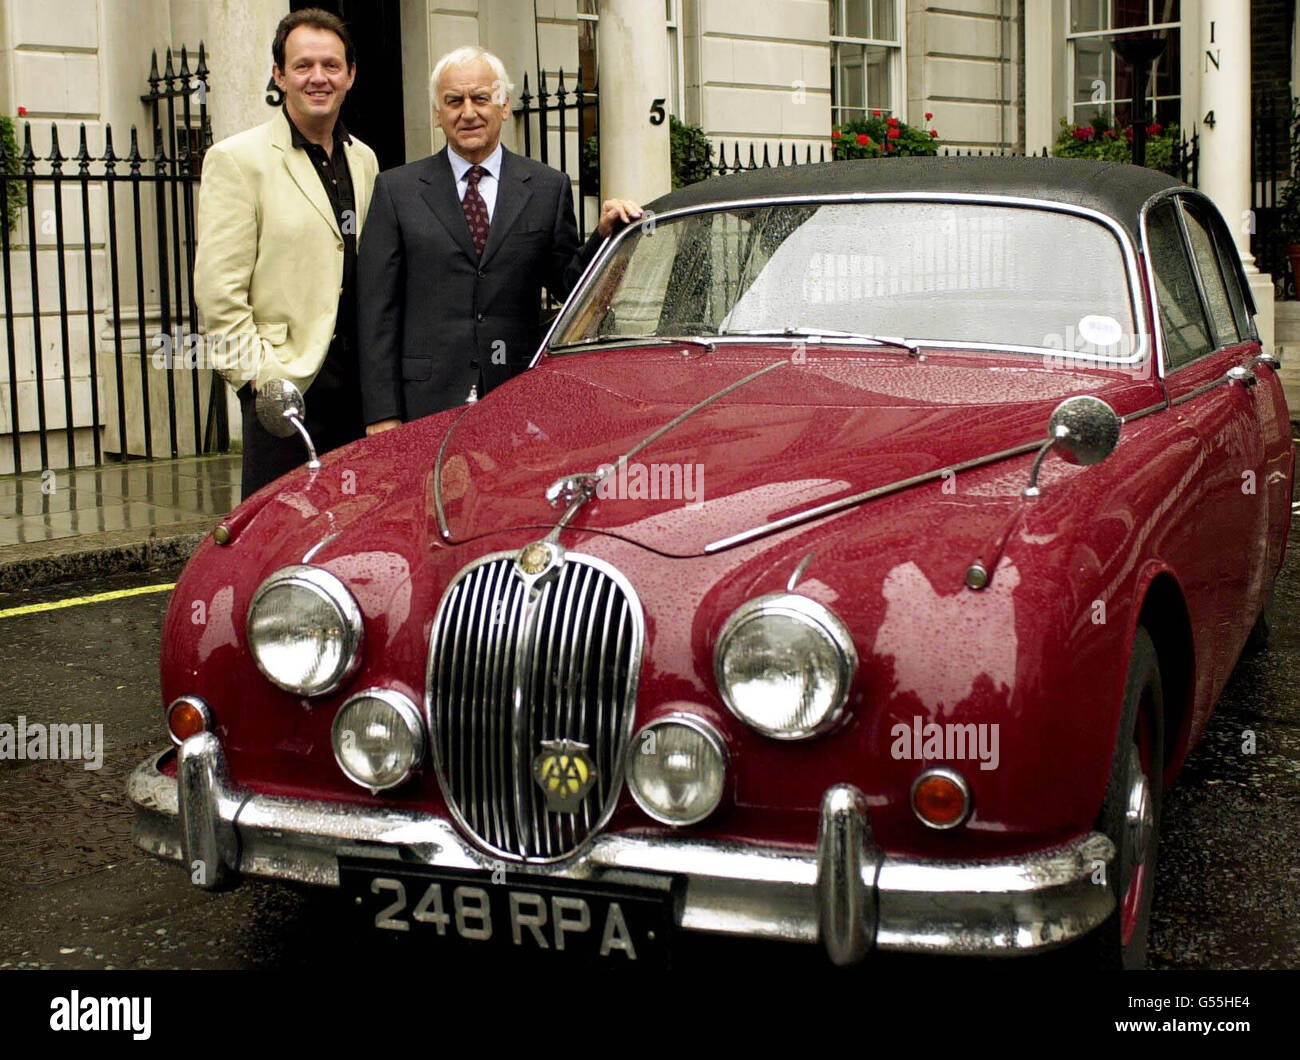 TV series Inspector Morse star John Thaw (right) and Kevin Whately, who plays Sgt Lewis, pose by Morse's Jaguar in St James's Square, central London, before filming the last ever Inspector Morse. * 22/11/01: The famous fictional character's car was won by James Went - a lawyer who is unable to drive because of a hand injury. The Morse creator Colin Dexter presented the keys to the 1959 Mark II burgundy Jaguar to Mr Went at a ceremony at Oxford's Magdalen College. Mr Went won the car, which has an estimated value of about , 100,000, in a competition organised by Carlton Television and Stock Photo